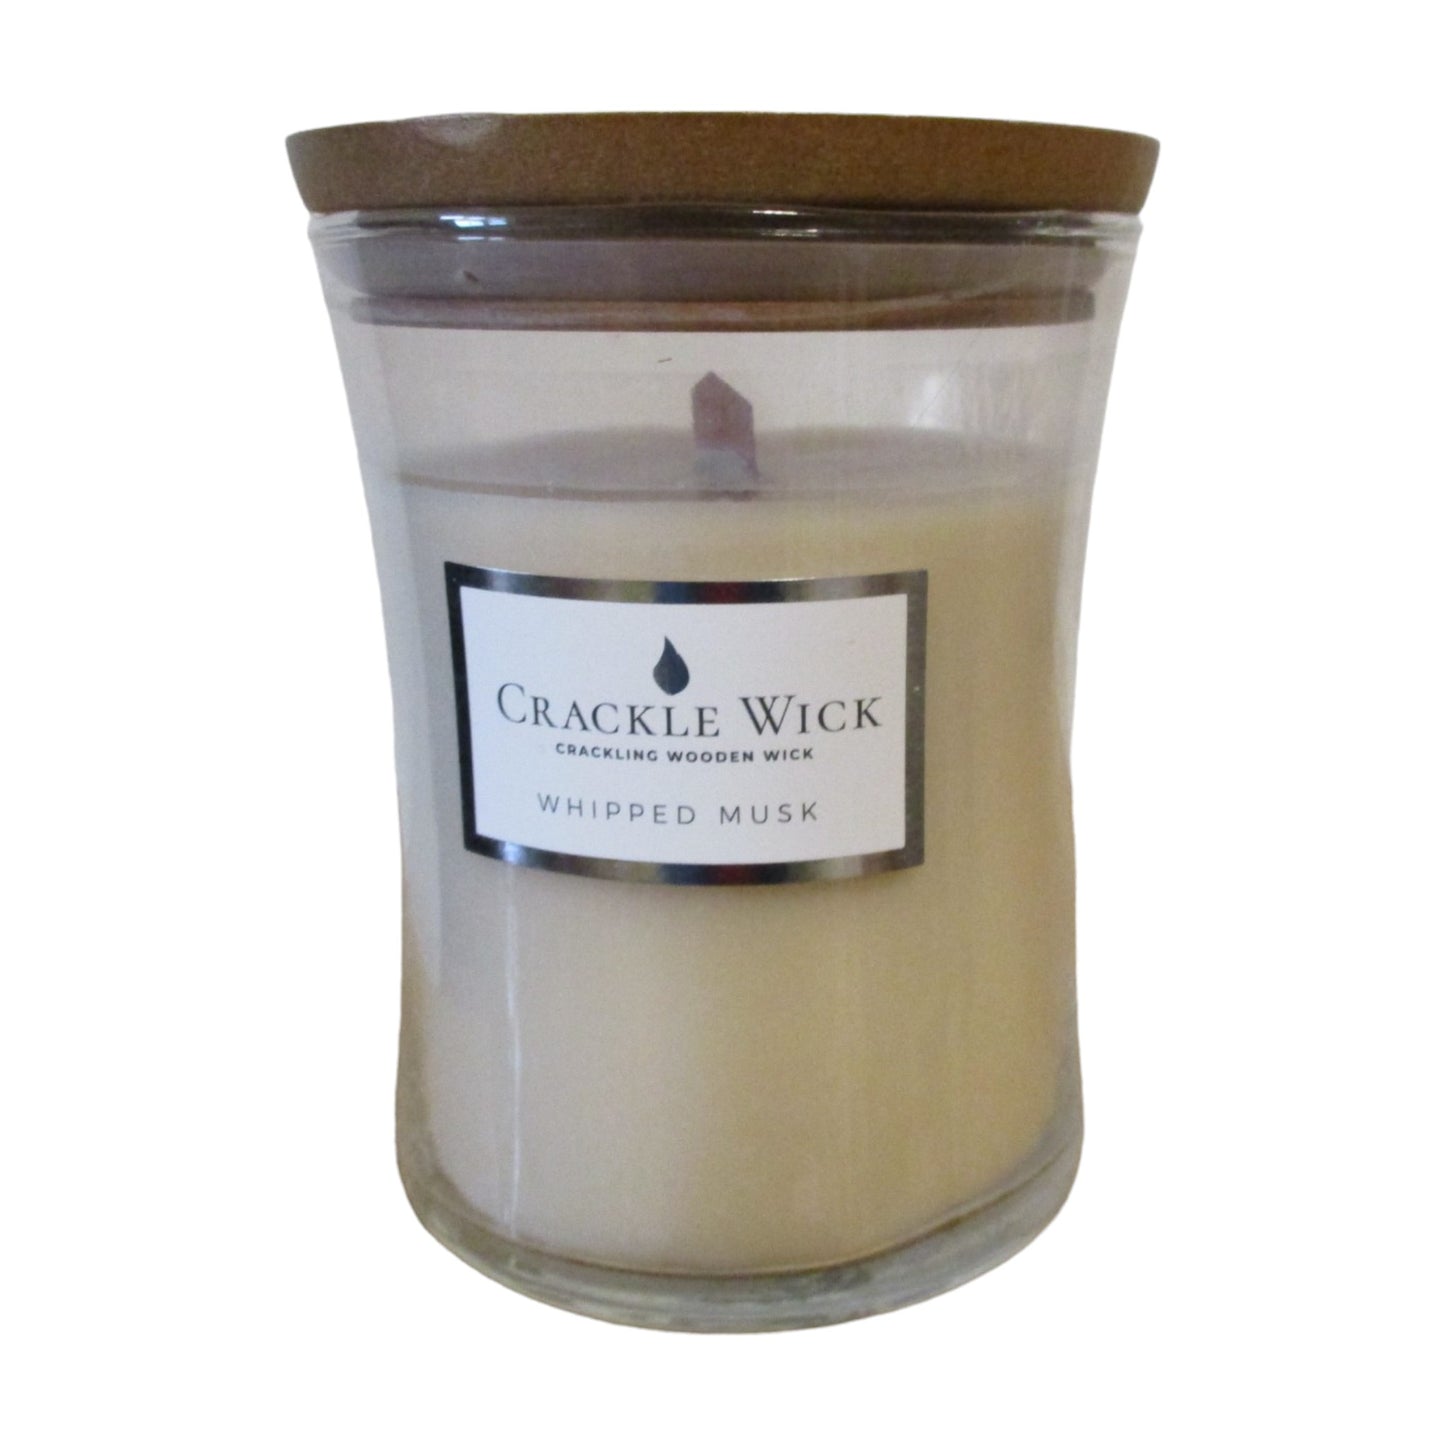 Crackle Wick - Whipped Musk - Single Wick Candle Medium Hourglass 310g